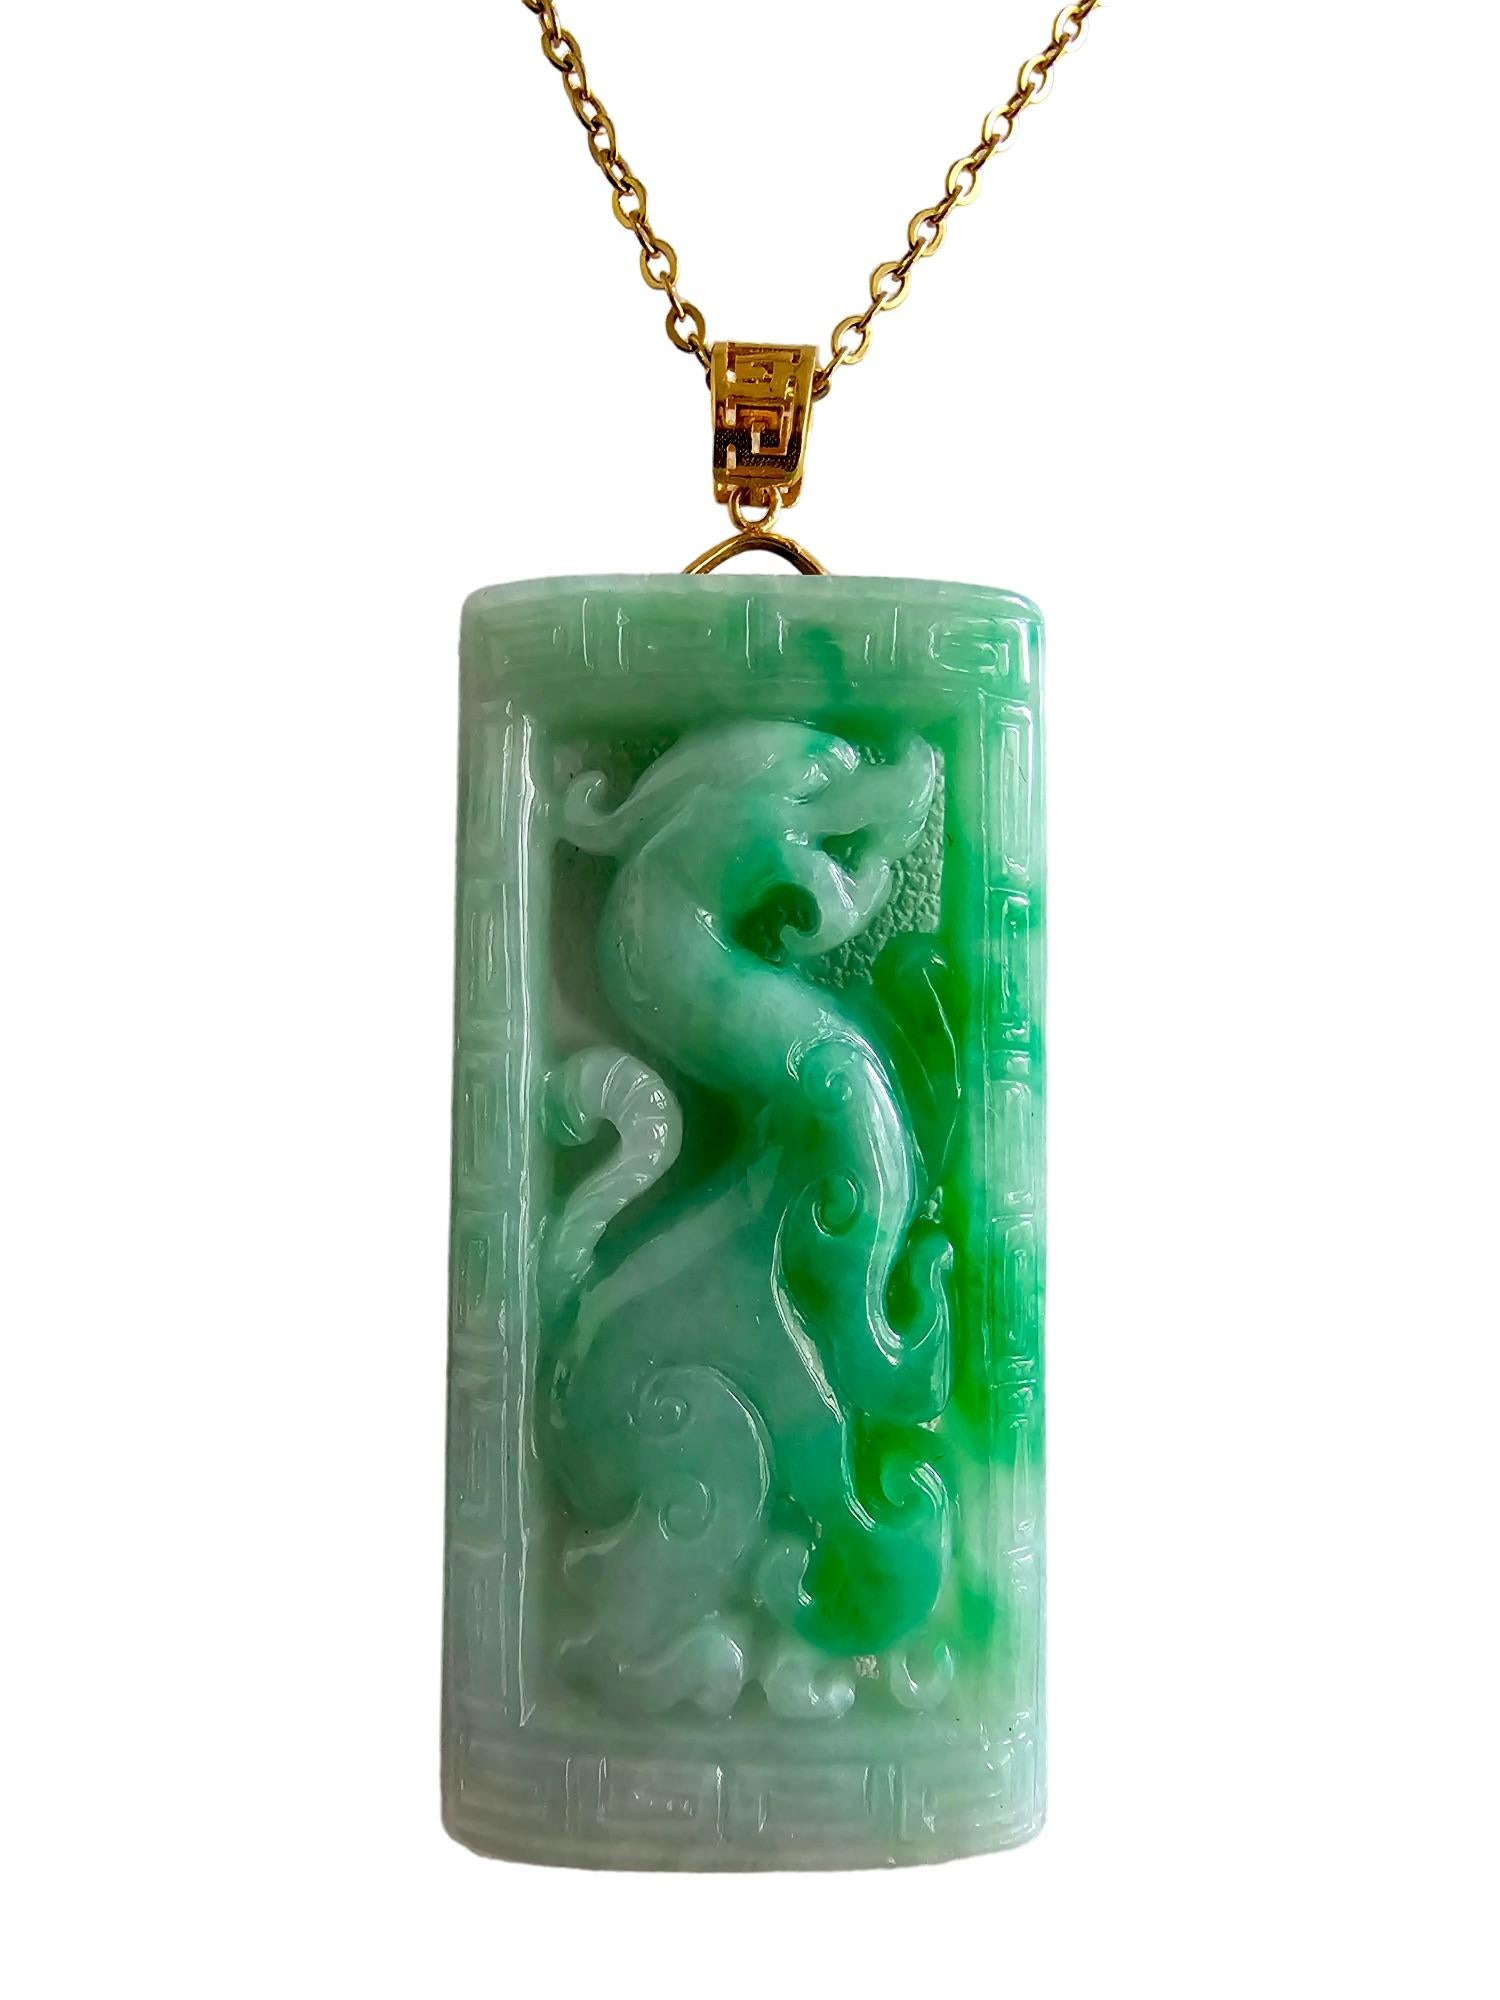 Enchanted Dragon Imperial Burmese A-Jade Jadeite Pendant with 18K Yellow Gold For Sale 6